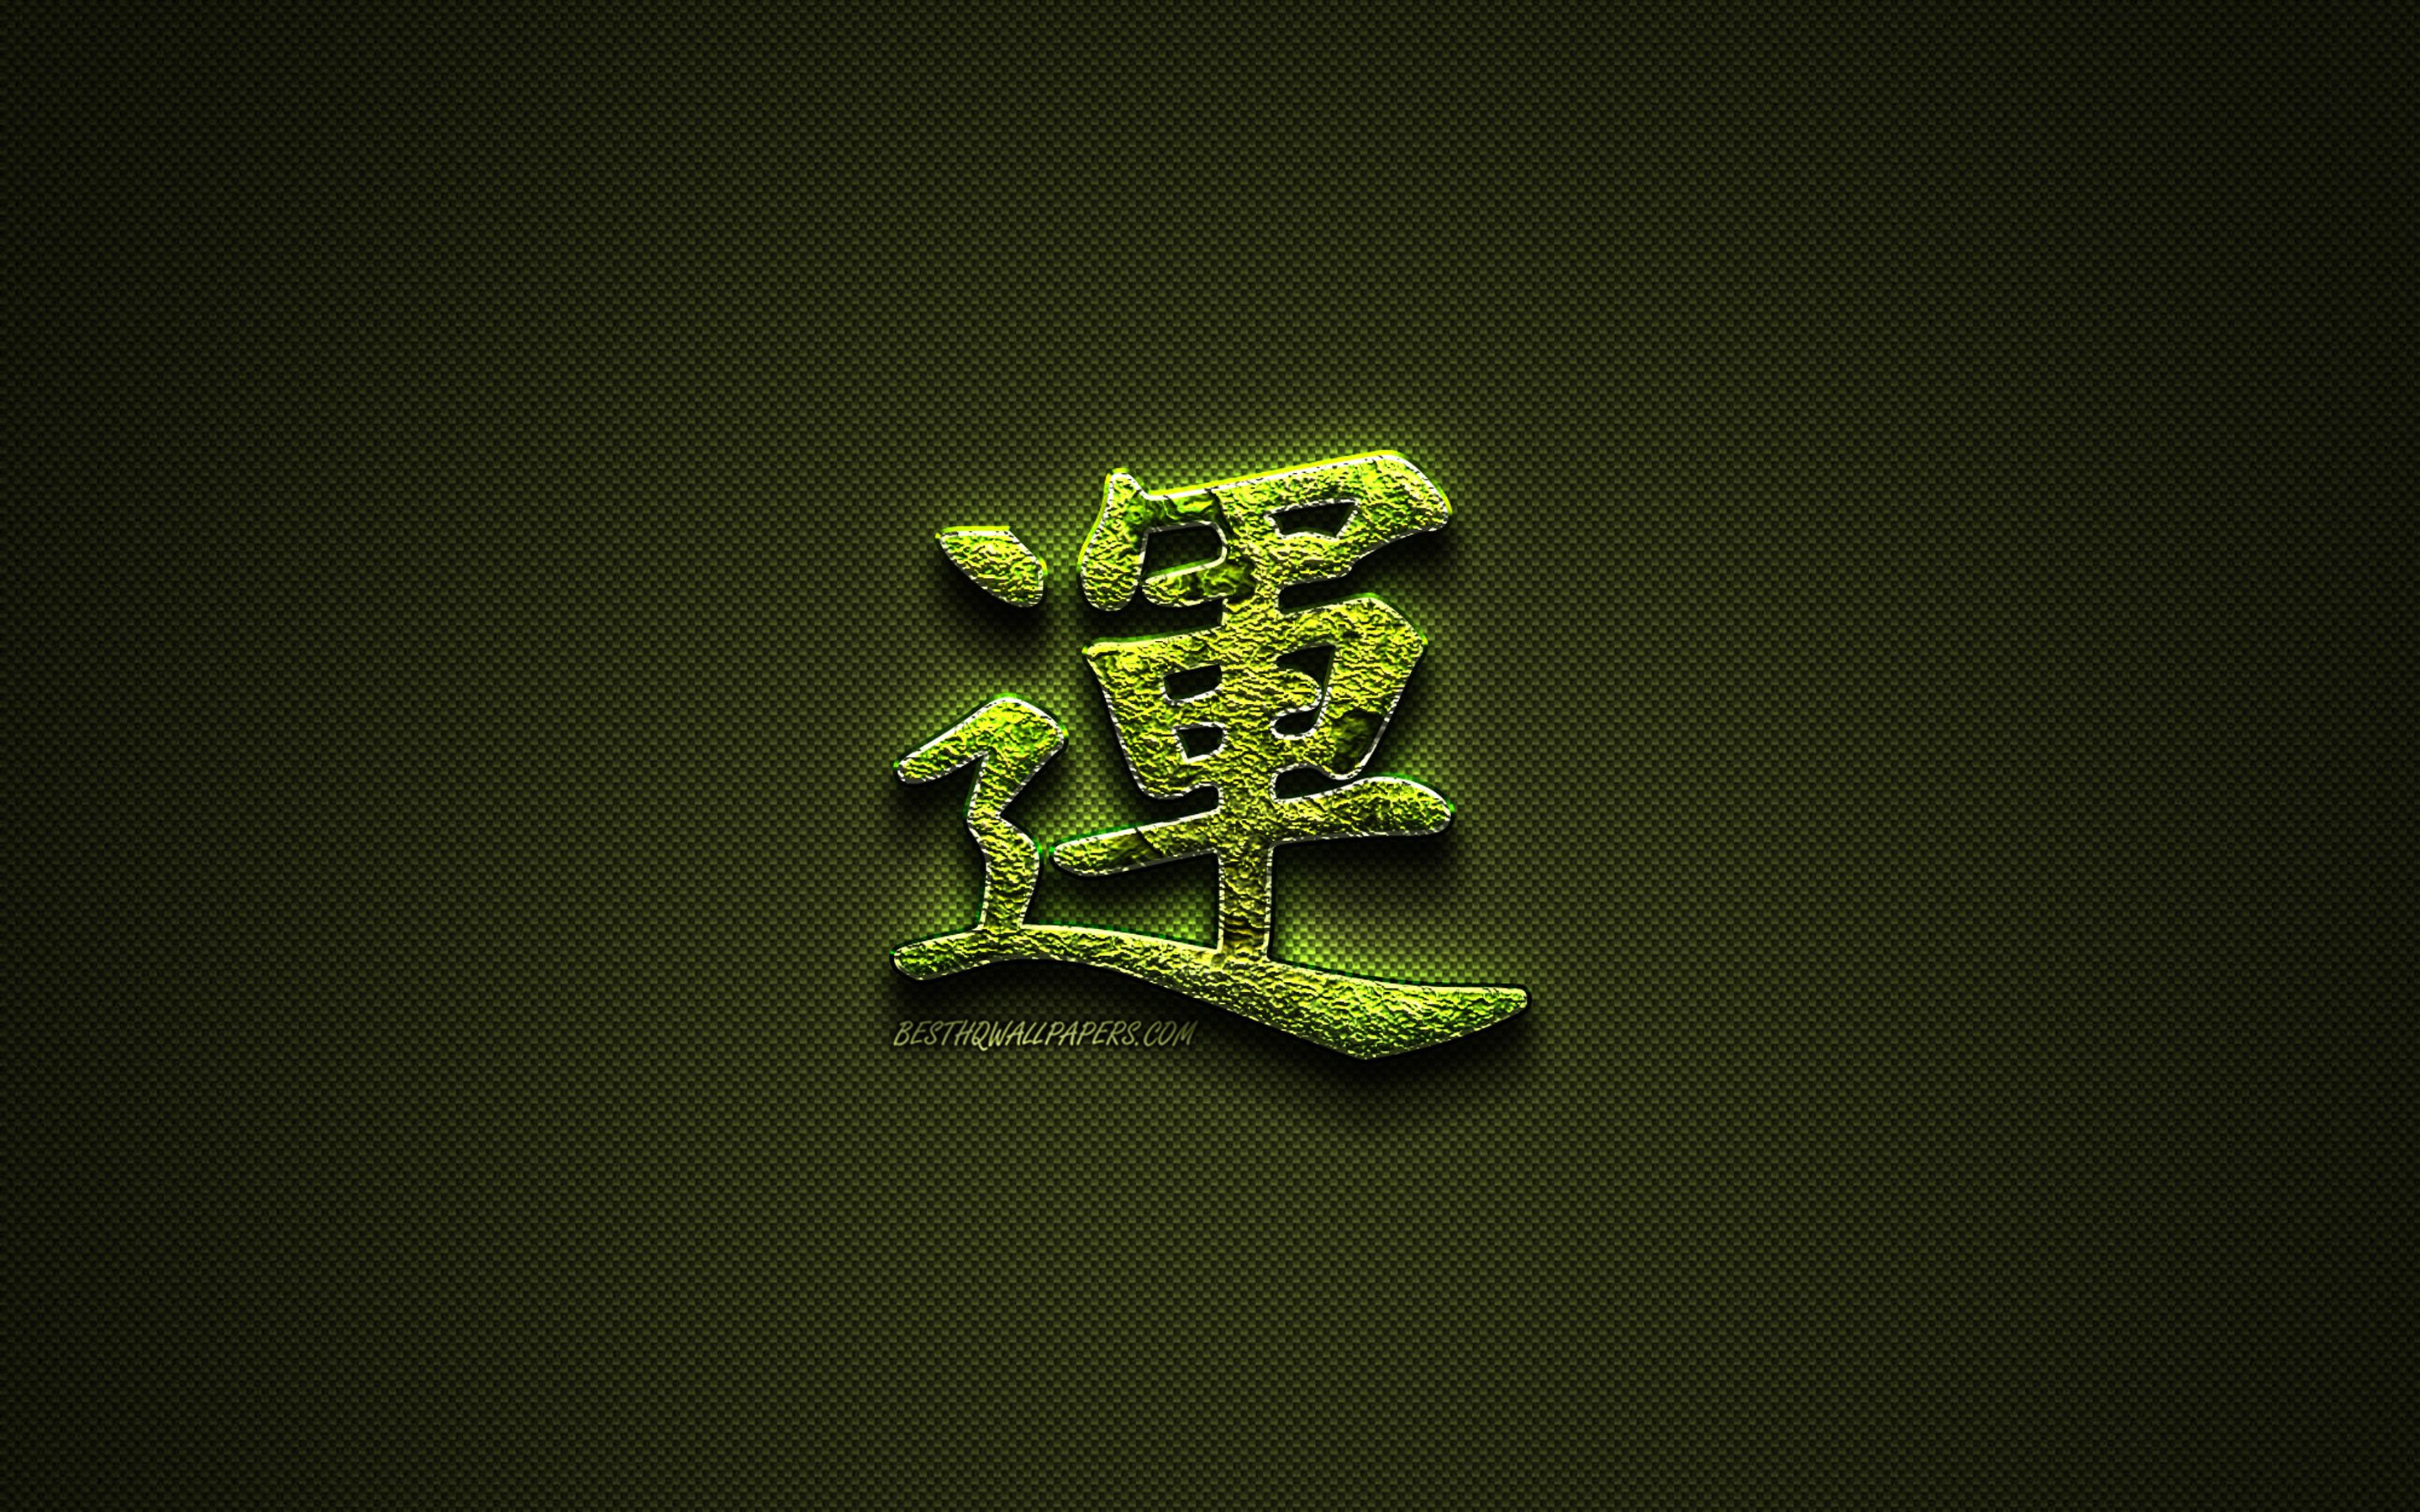 Download wallpaper Luck Kanji hieroglyph, green floral symbols, Luck Japanese Symbol, japanese hieroglyphs, Kanji, Japanese Symbol for Luck, grass symbols, Luck Japanese character for desktop with resolution 2880x1800. High Quality HD picture